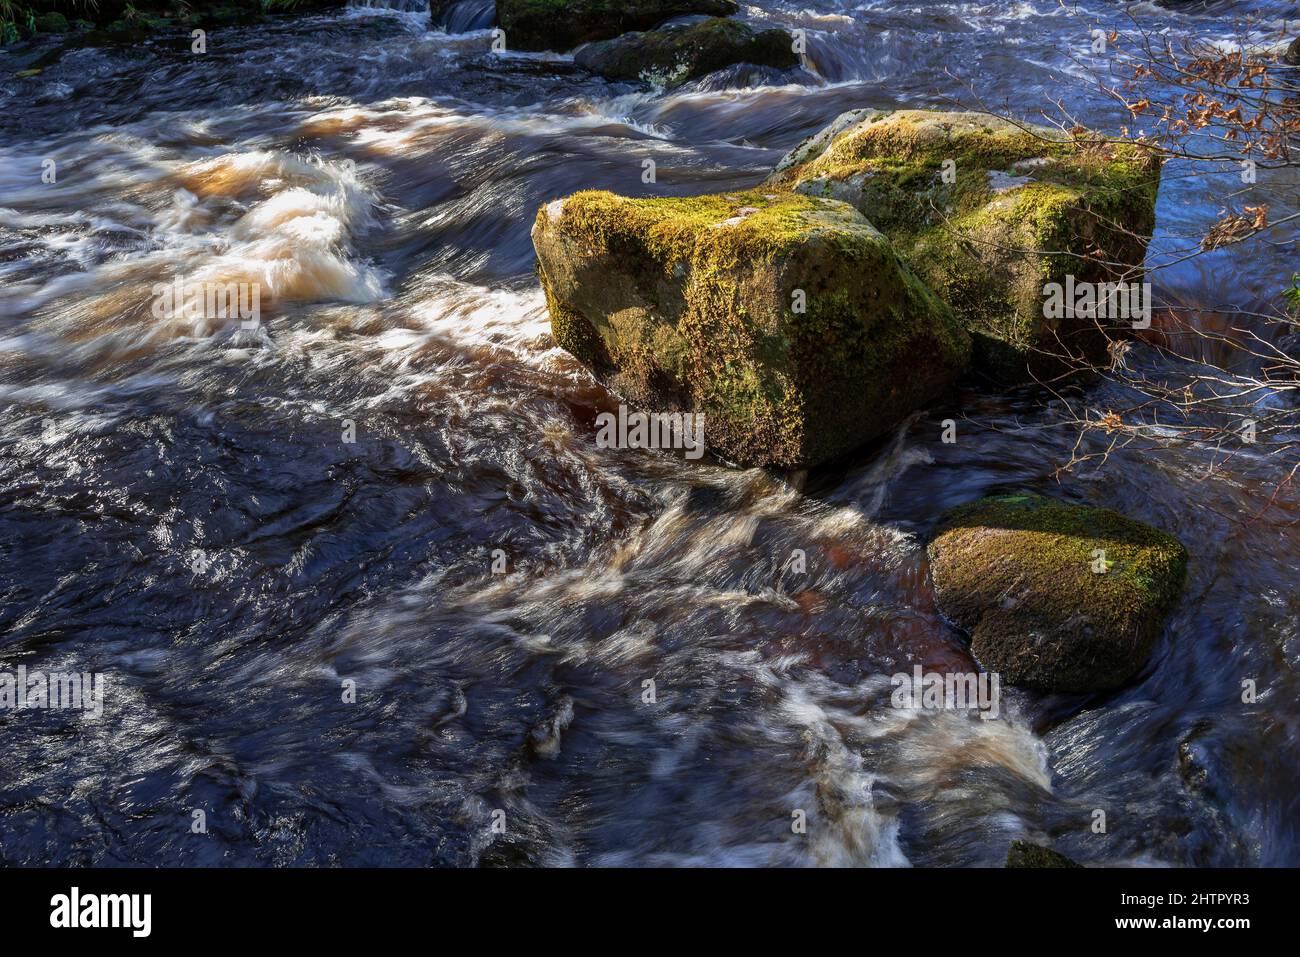 Rushing waters and moss covered rocks in the Hebden Beck. West Yorkshire. Stock Photo